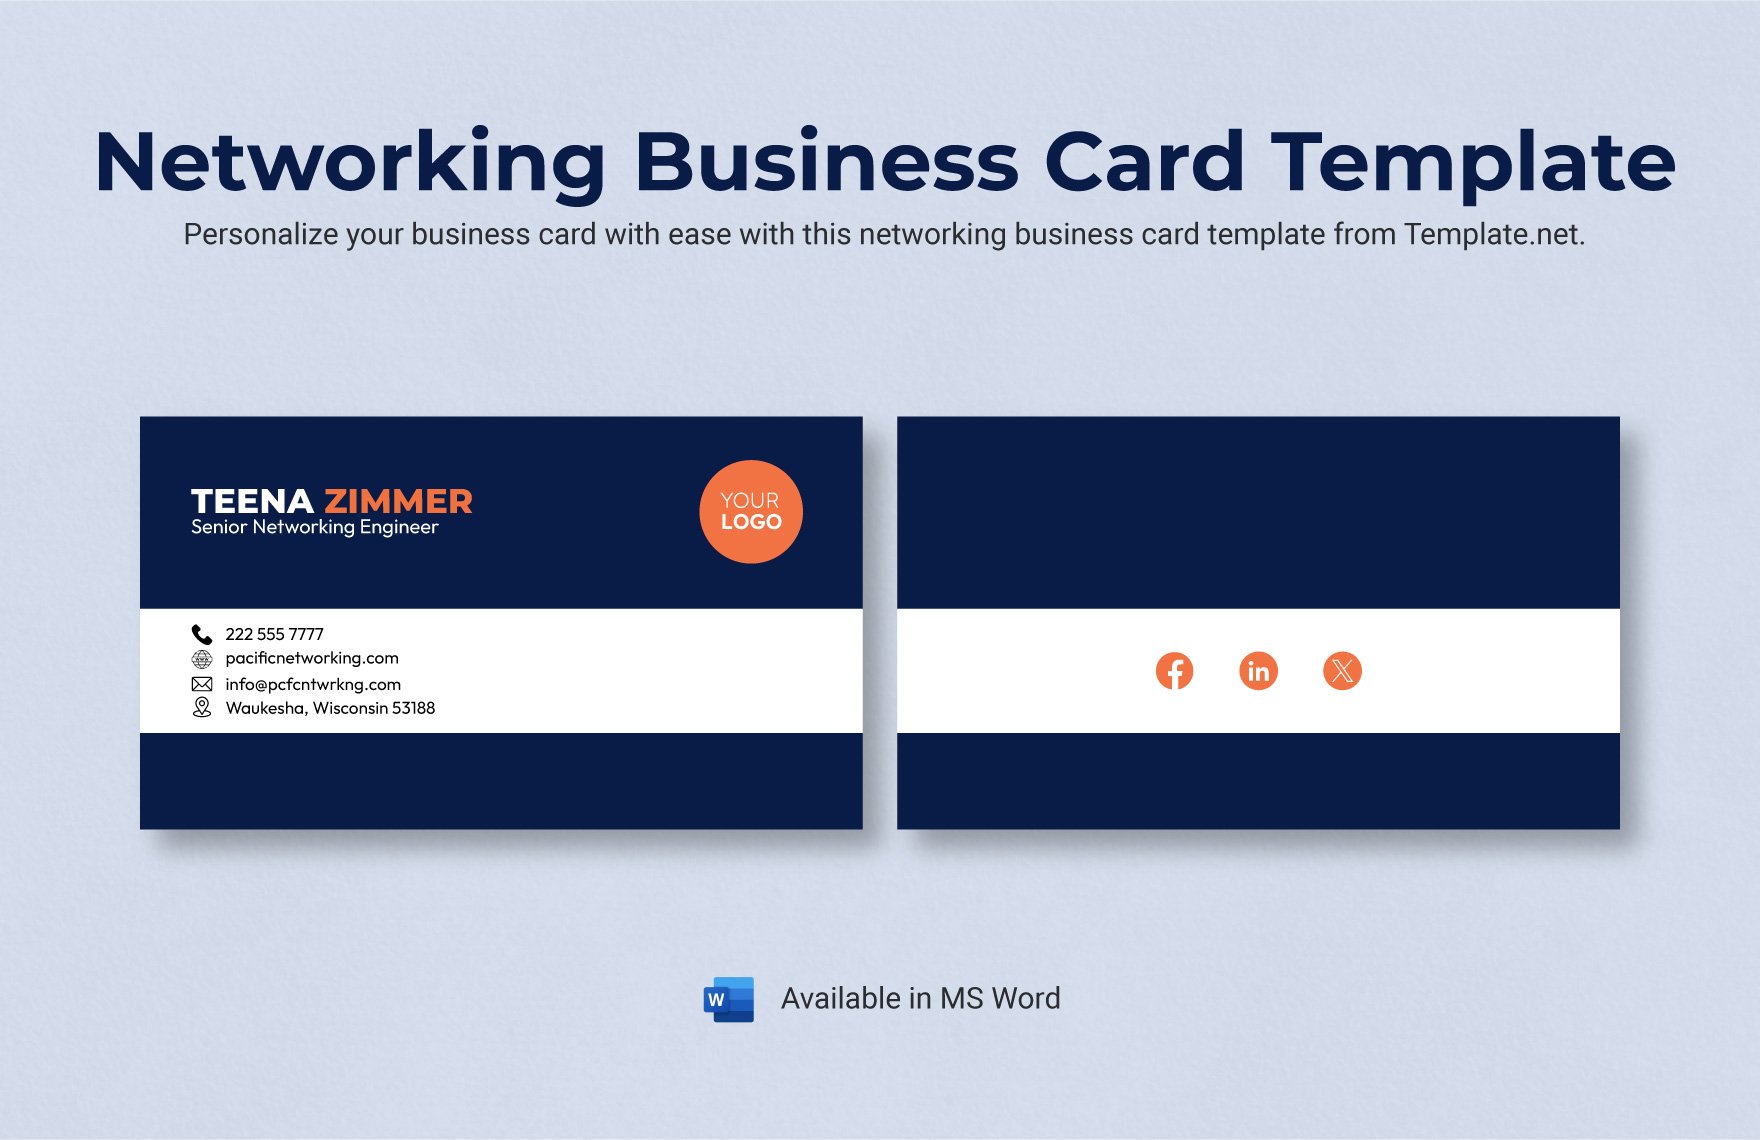 Networking Business Card Template in Word